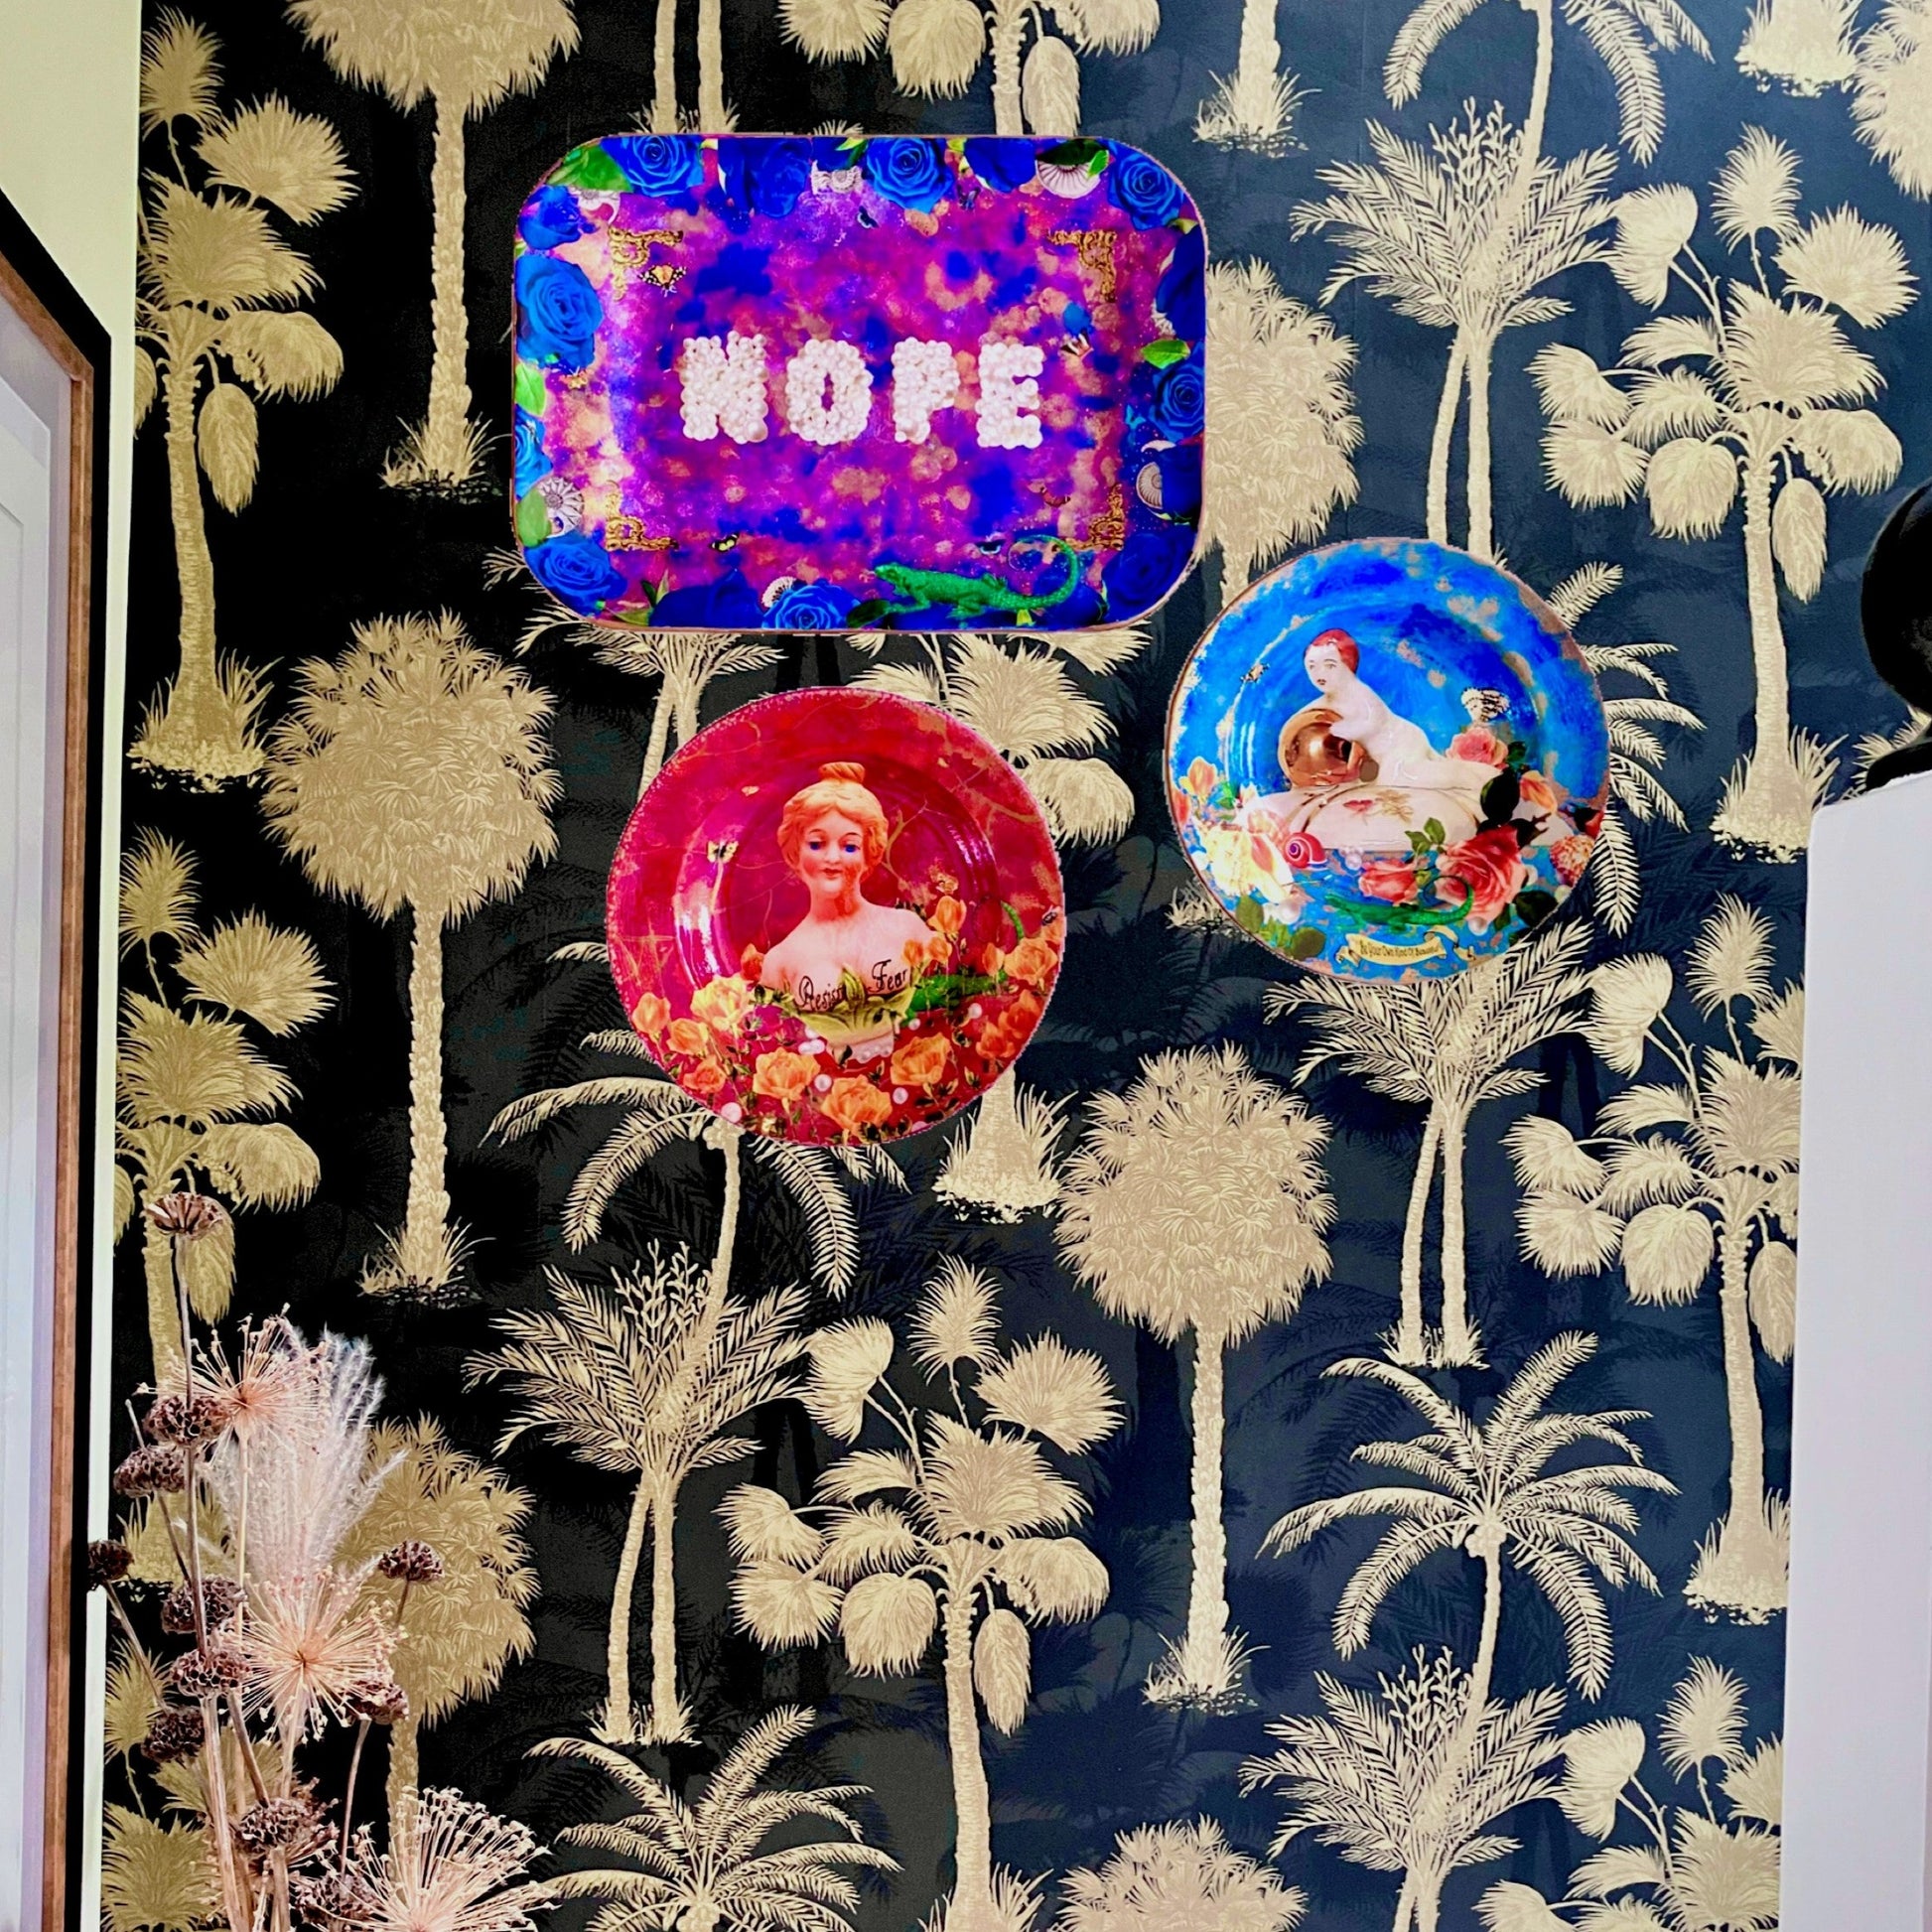 "Nope" Wall Plate by House of Frisson. Featuring the word "nope" written with pearls, framed by blue roses, shells, moths, and a lizard, on a  purple, blue and golden background. Lifestyle photo of plate on a wall with other plates.